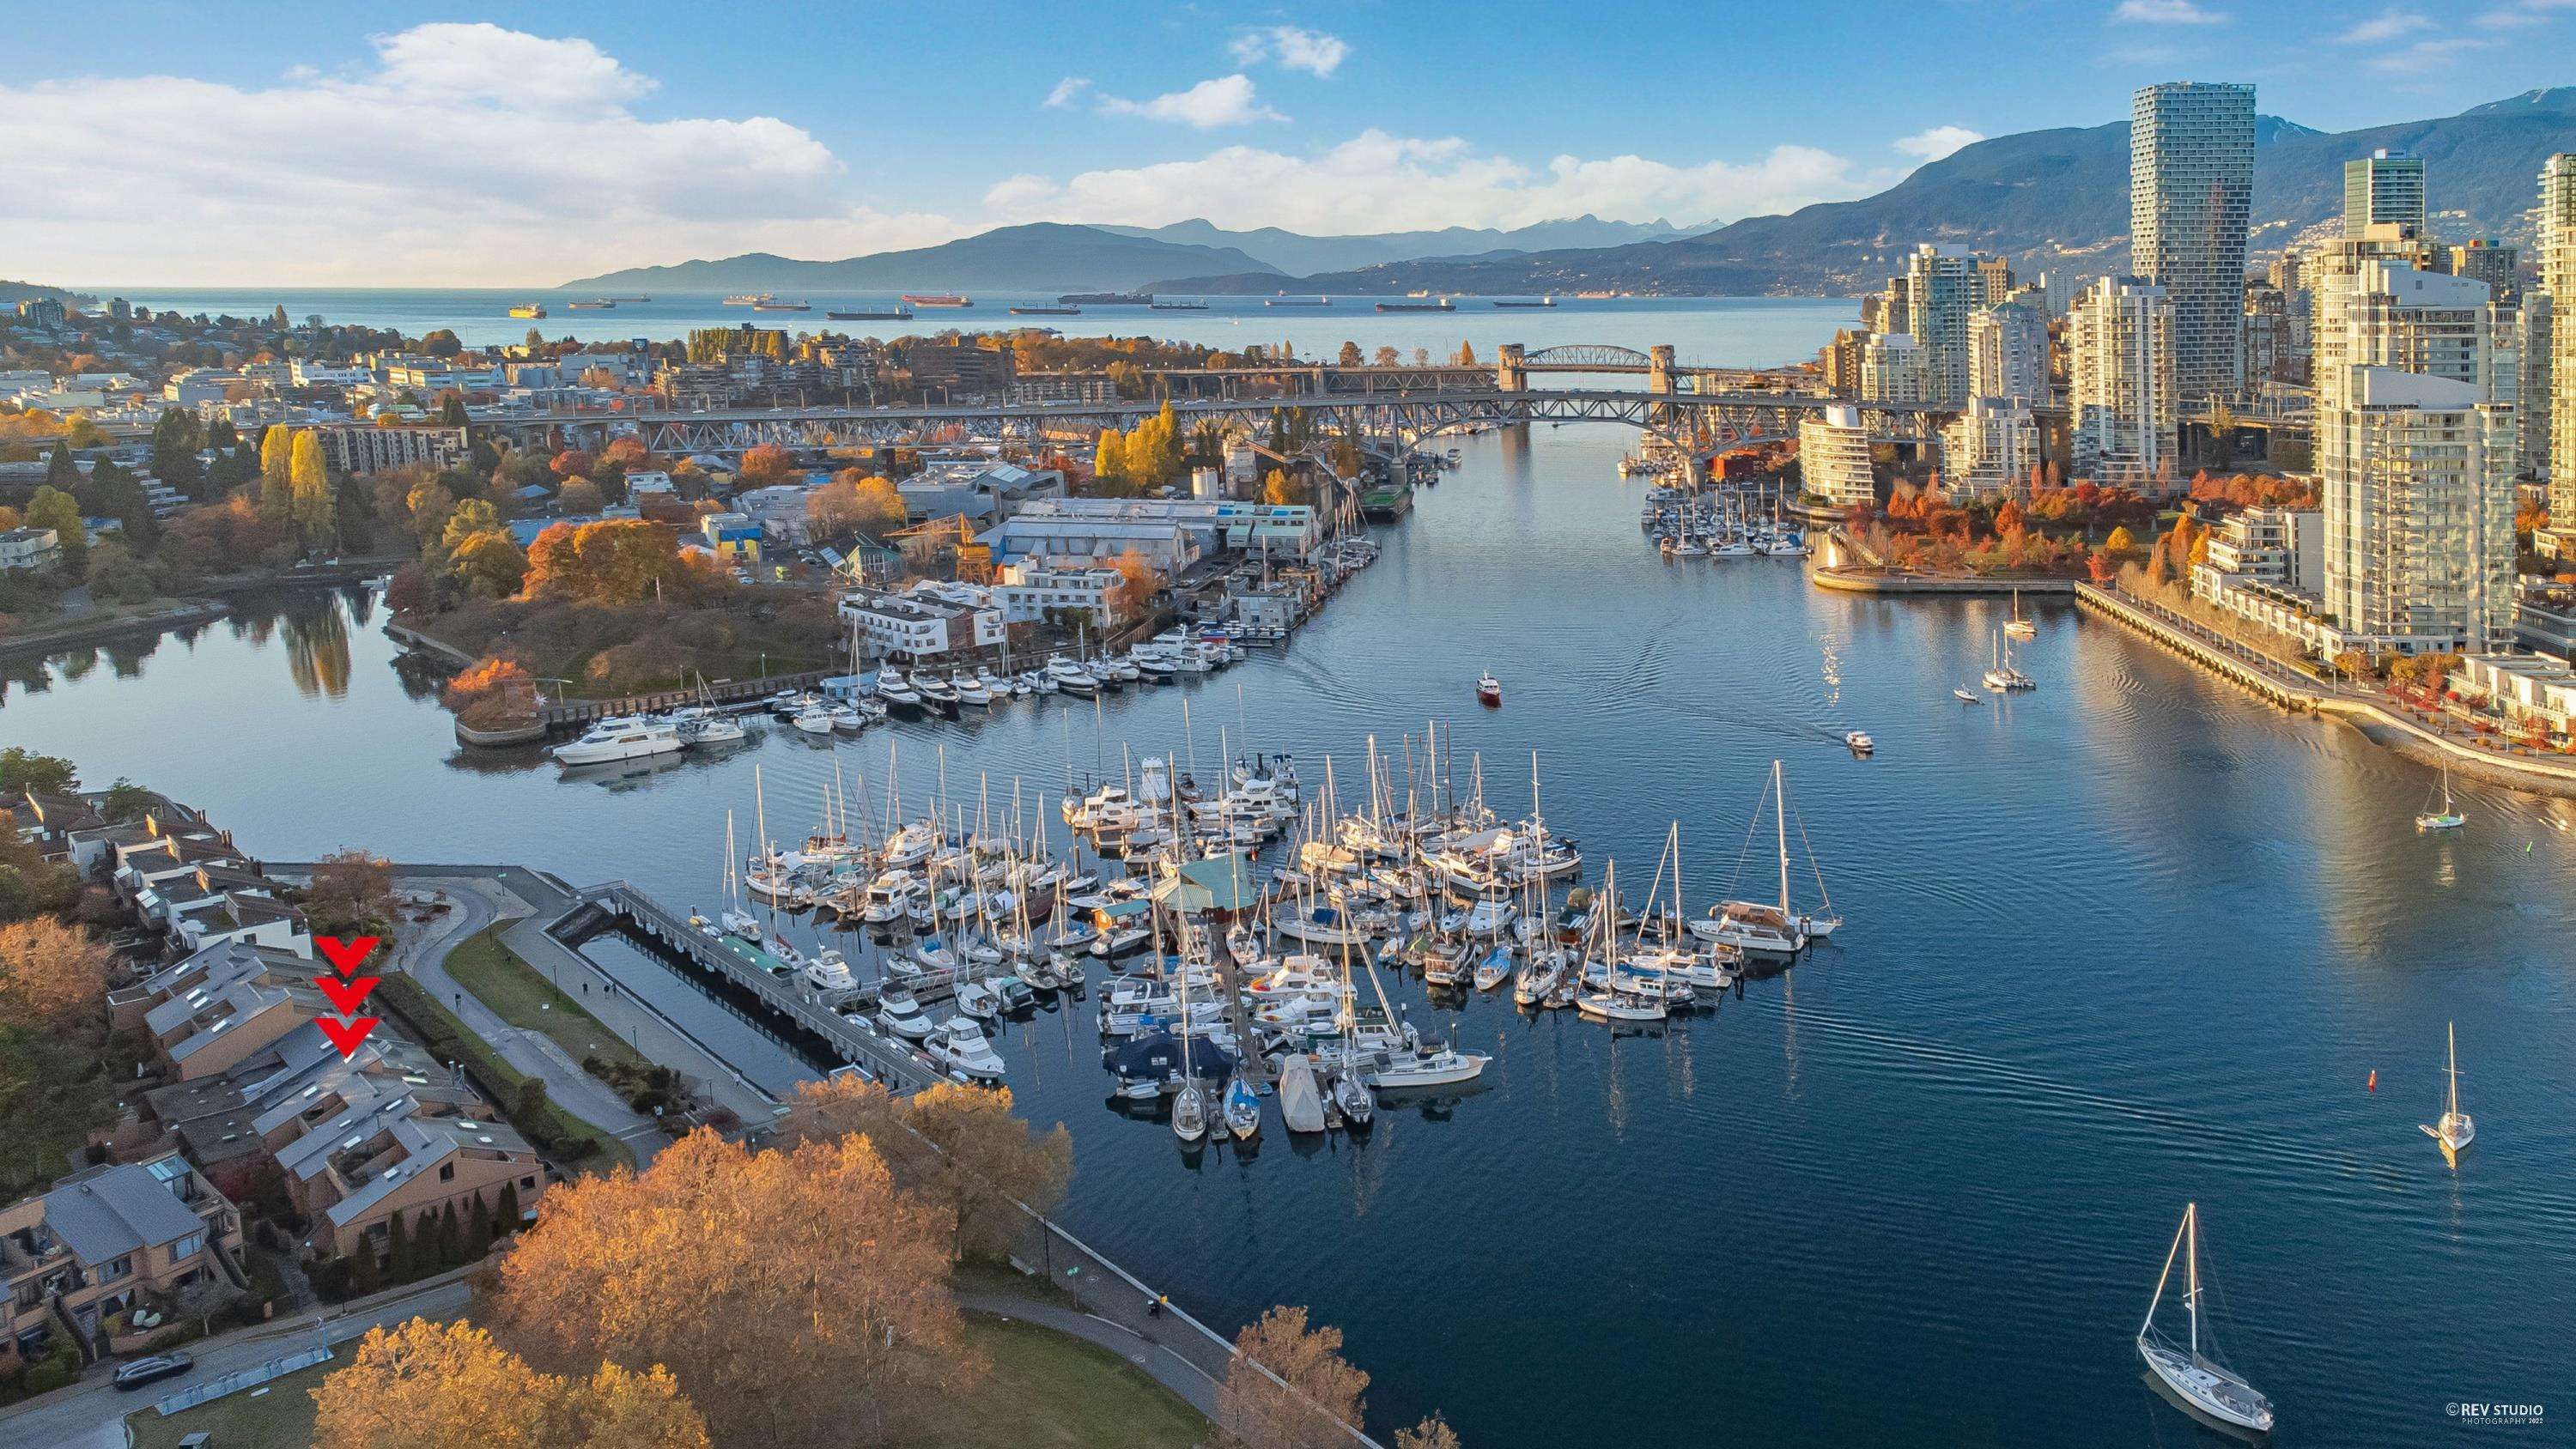 Open House. Open House on Saturday, December 3, 2022 2:00PM - 4:00PM
WATERFRONT TOWNHOUSE w/ stunning water, marina, cityscape and mtn views. 180 degree views W out to English Bay sunsets and E to the Cambie St. Bridge sunrises. Renovation by Colbrone Arc